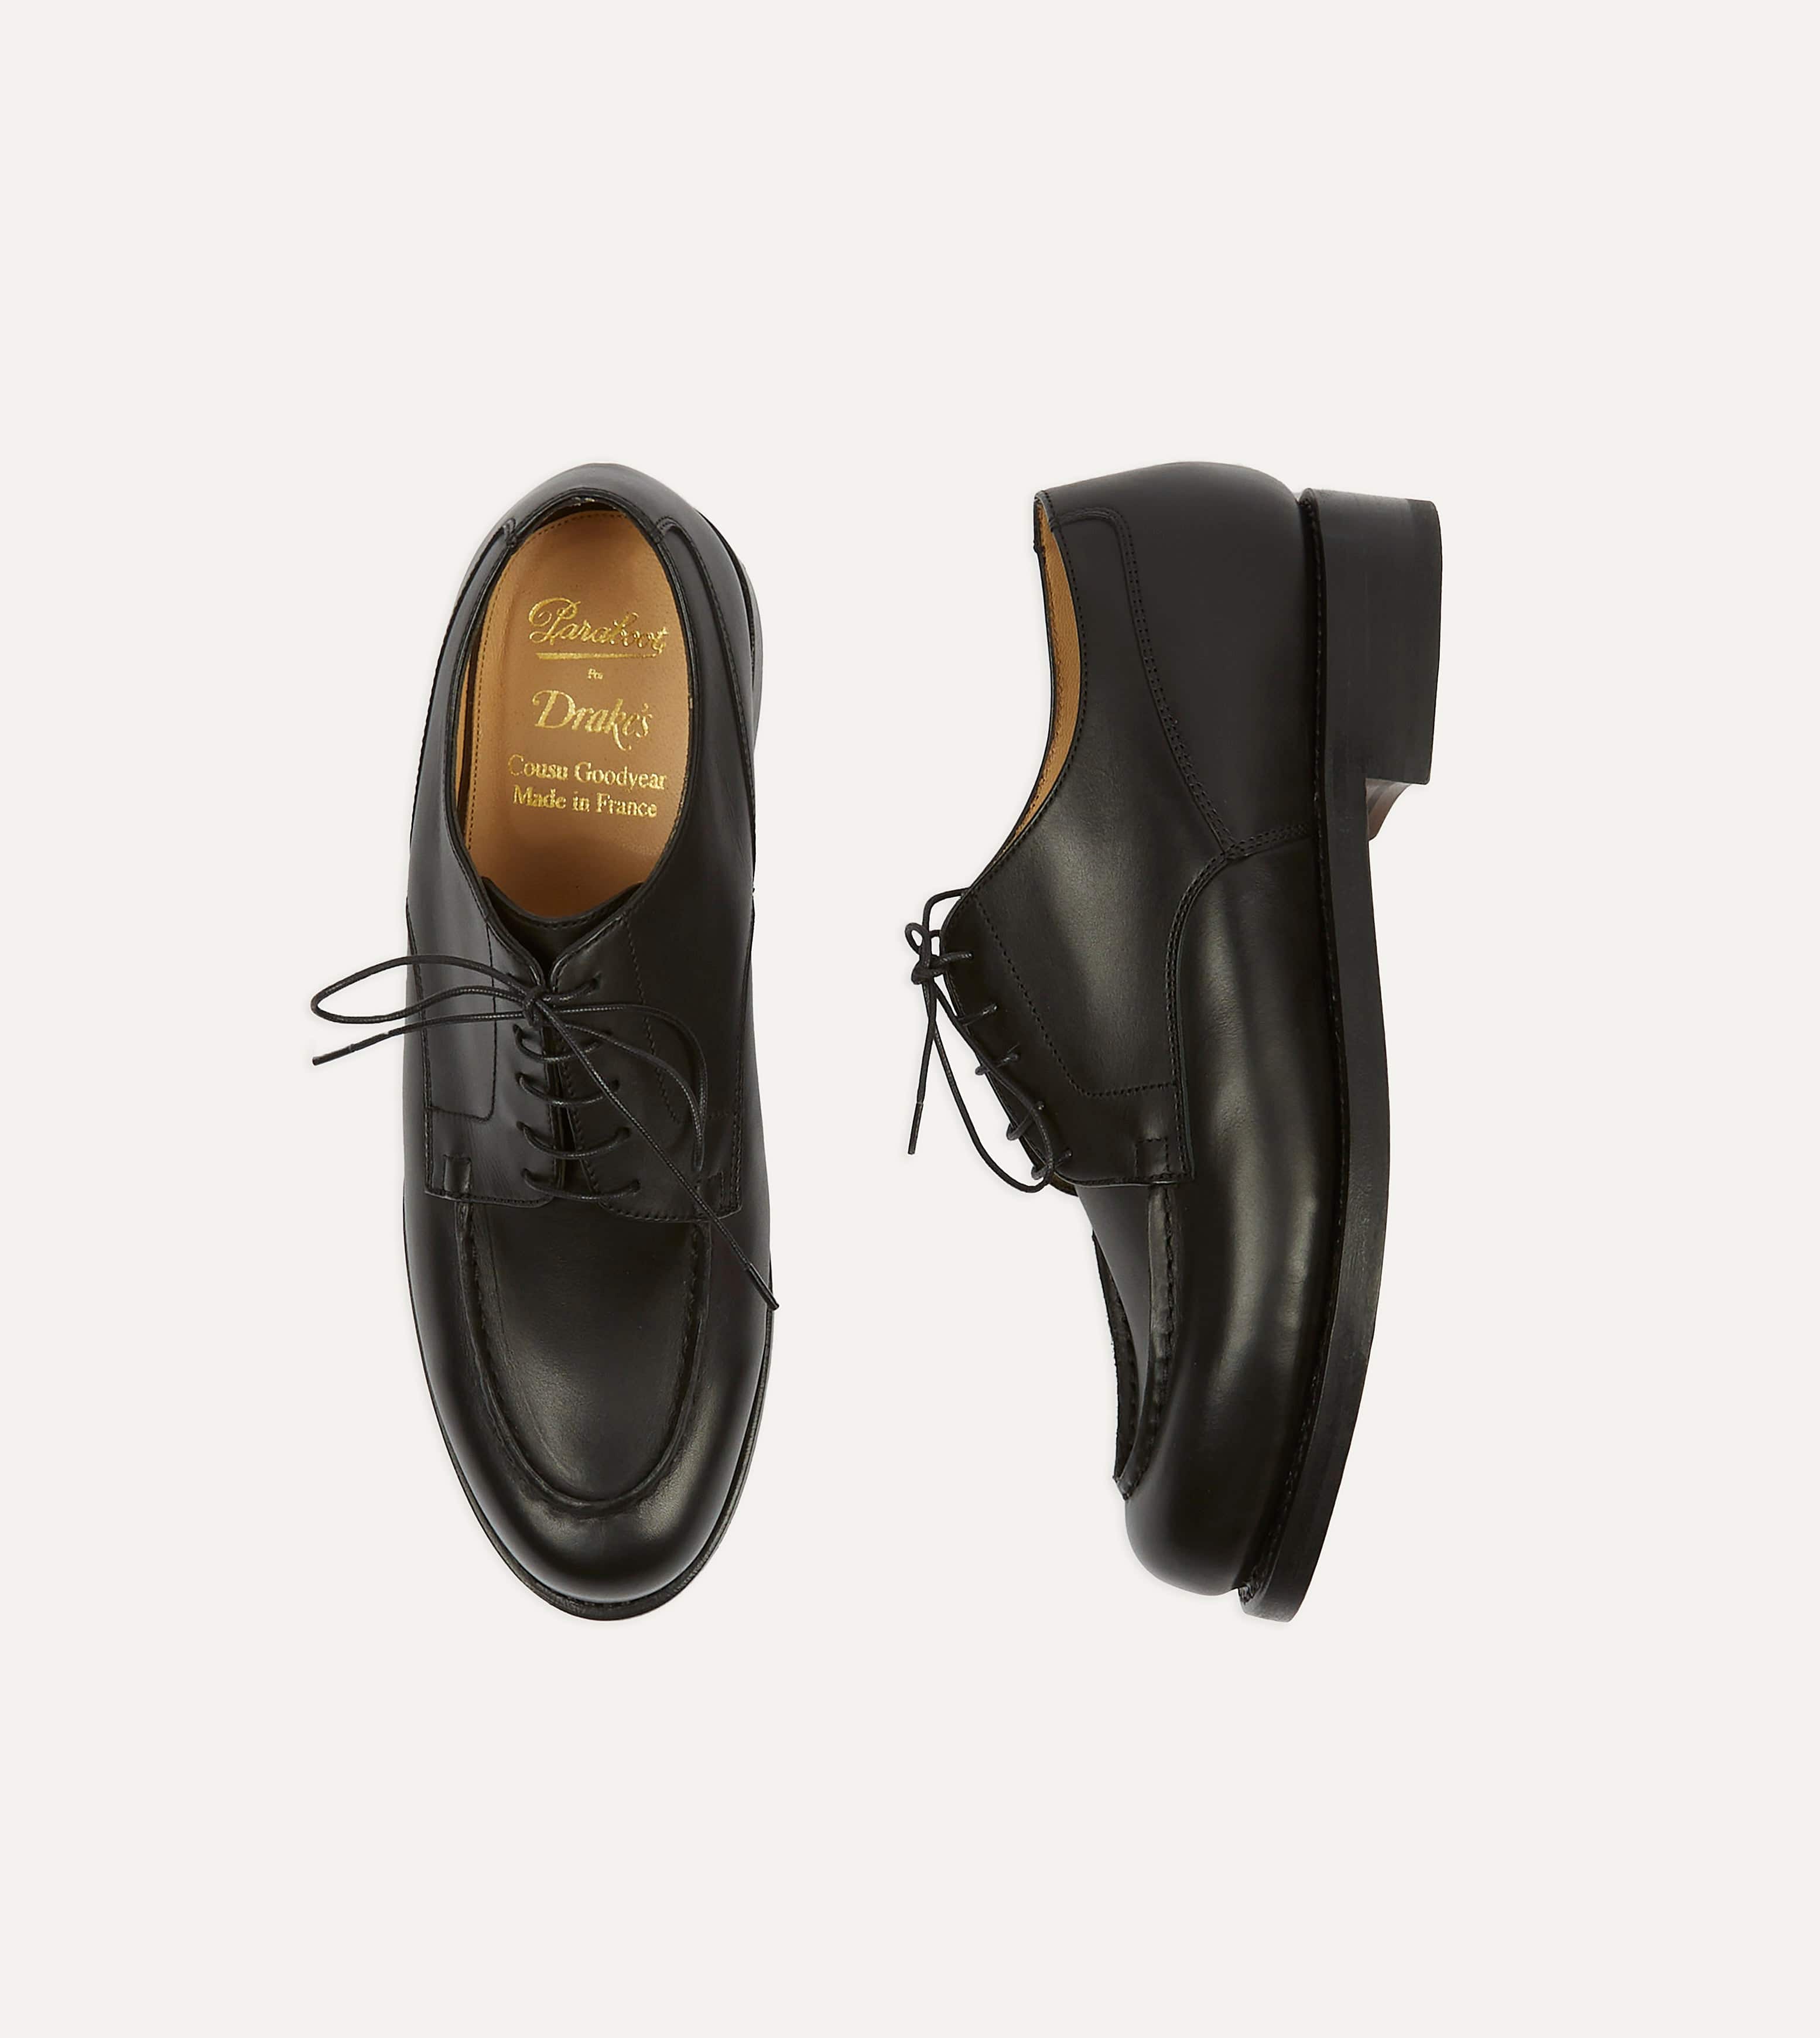 Paraboot Chambord Black Calf Leather Derby Shoe – Drakes